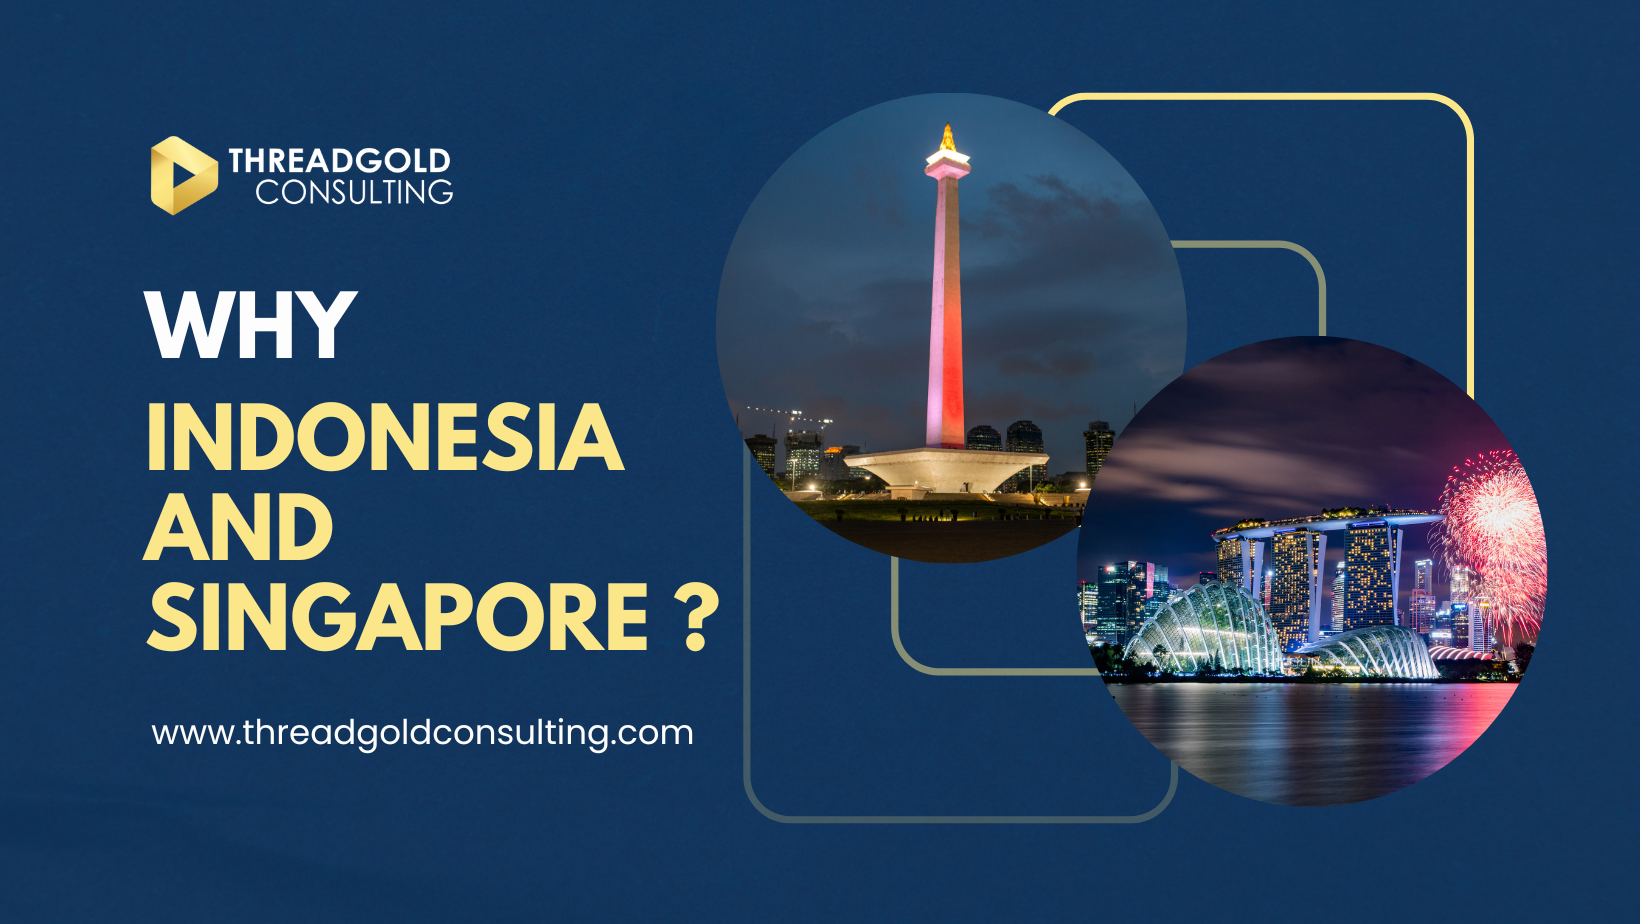 Why Indonesia and Singapore?